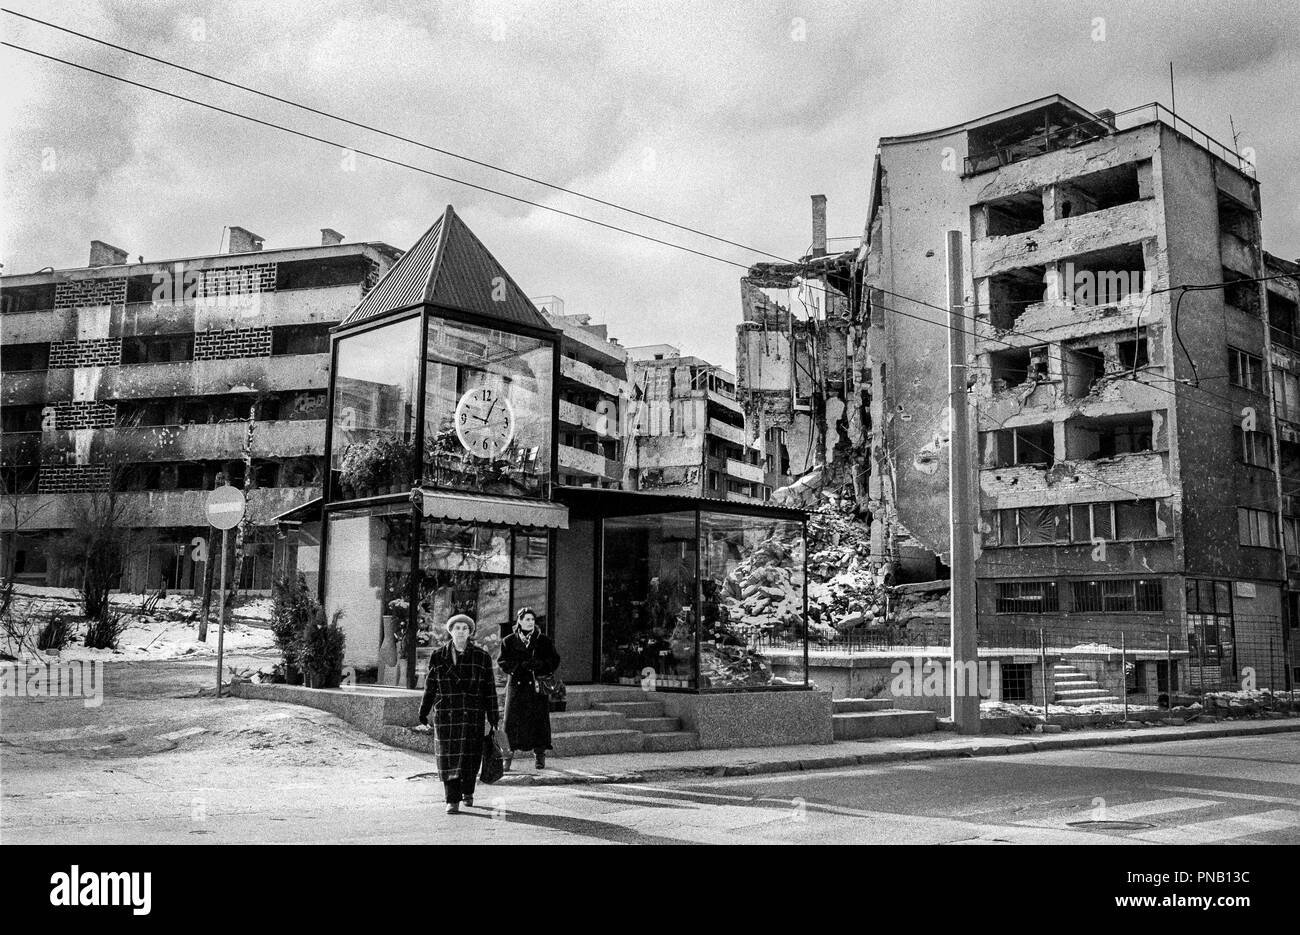 During the 1992-1995 war, Grbavica was occupied early by the Army of Republika Srpska and remained under Serb control throughout the siege. From the tall residential buildings, Serb snipers target the Sarajevo populace along Sniper Alley. The neighbourhood was heavily looted and destroyed. Stock Photo